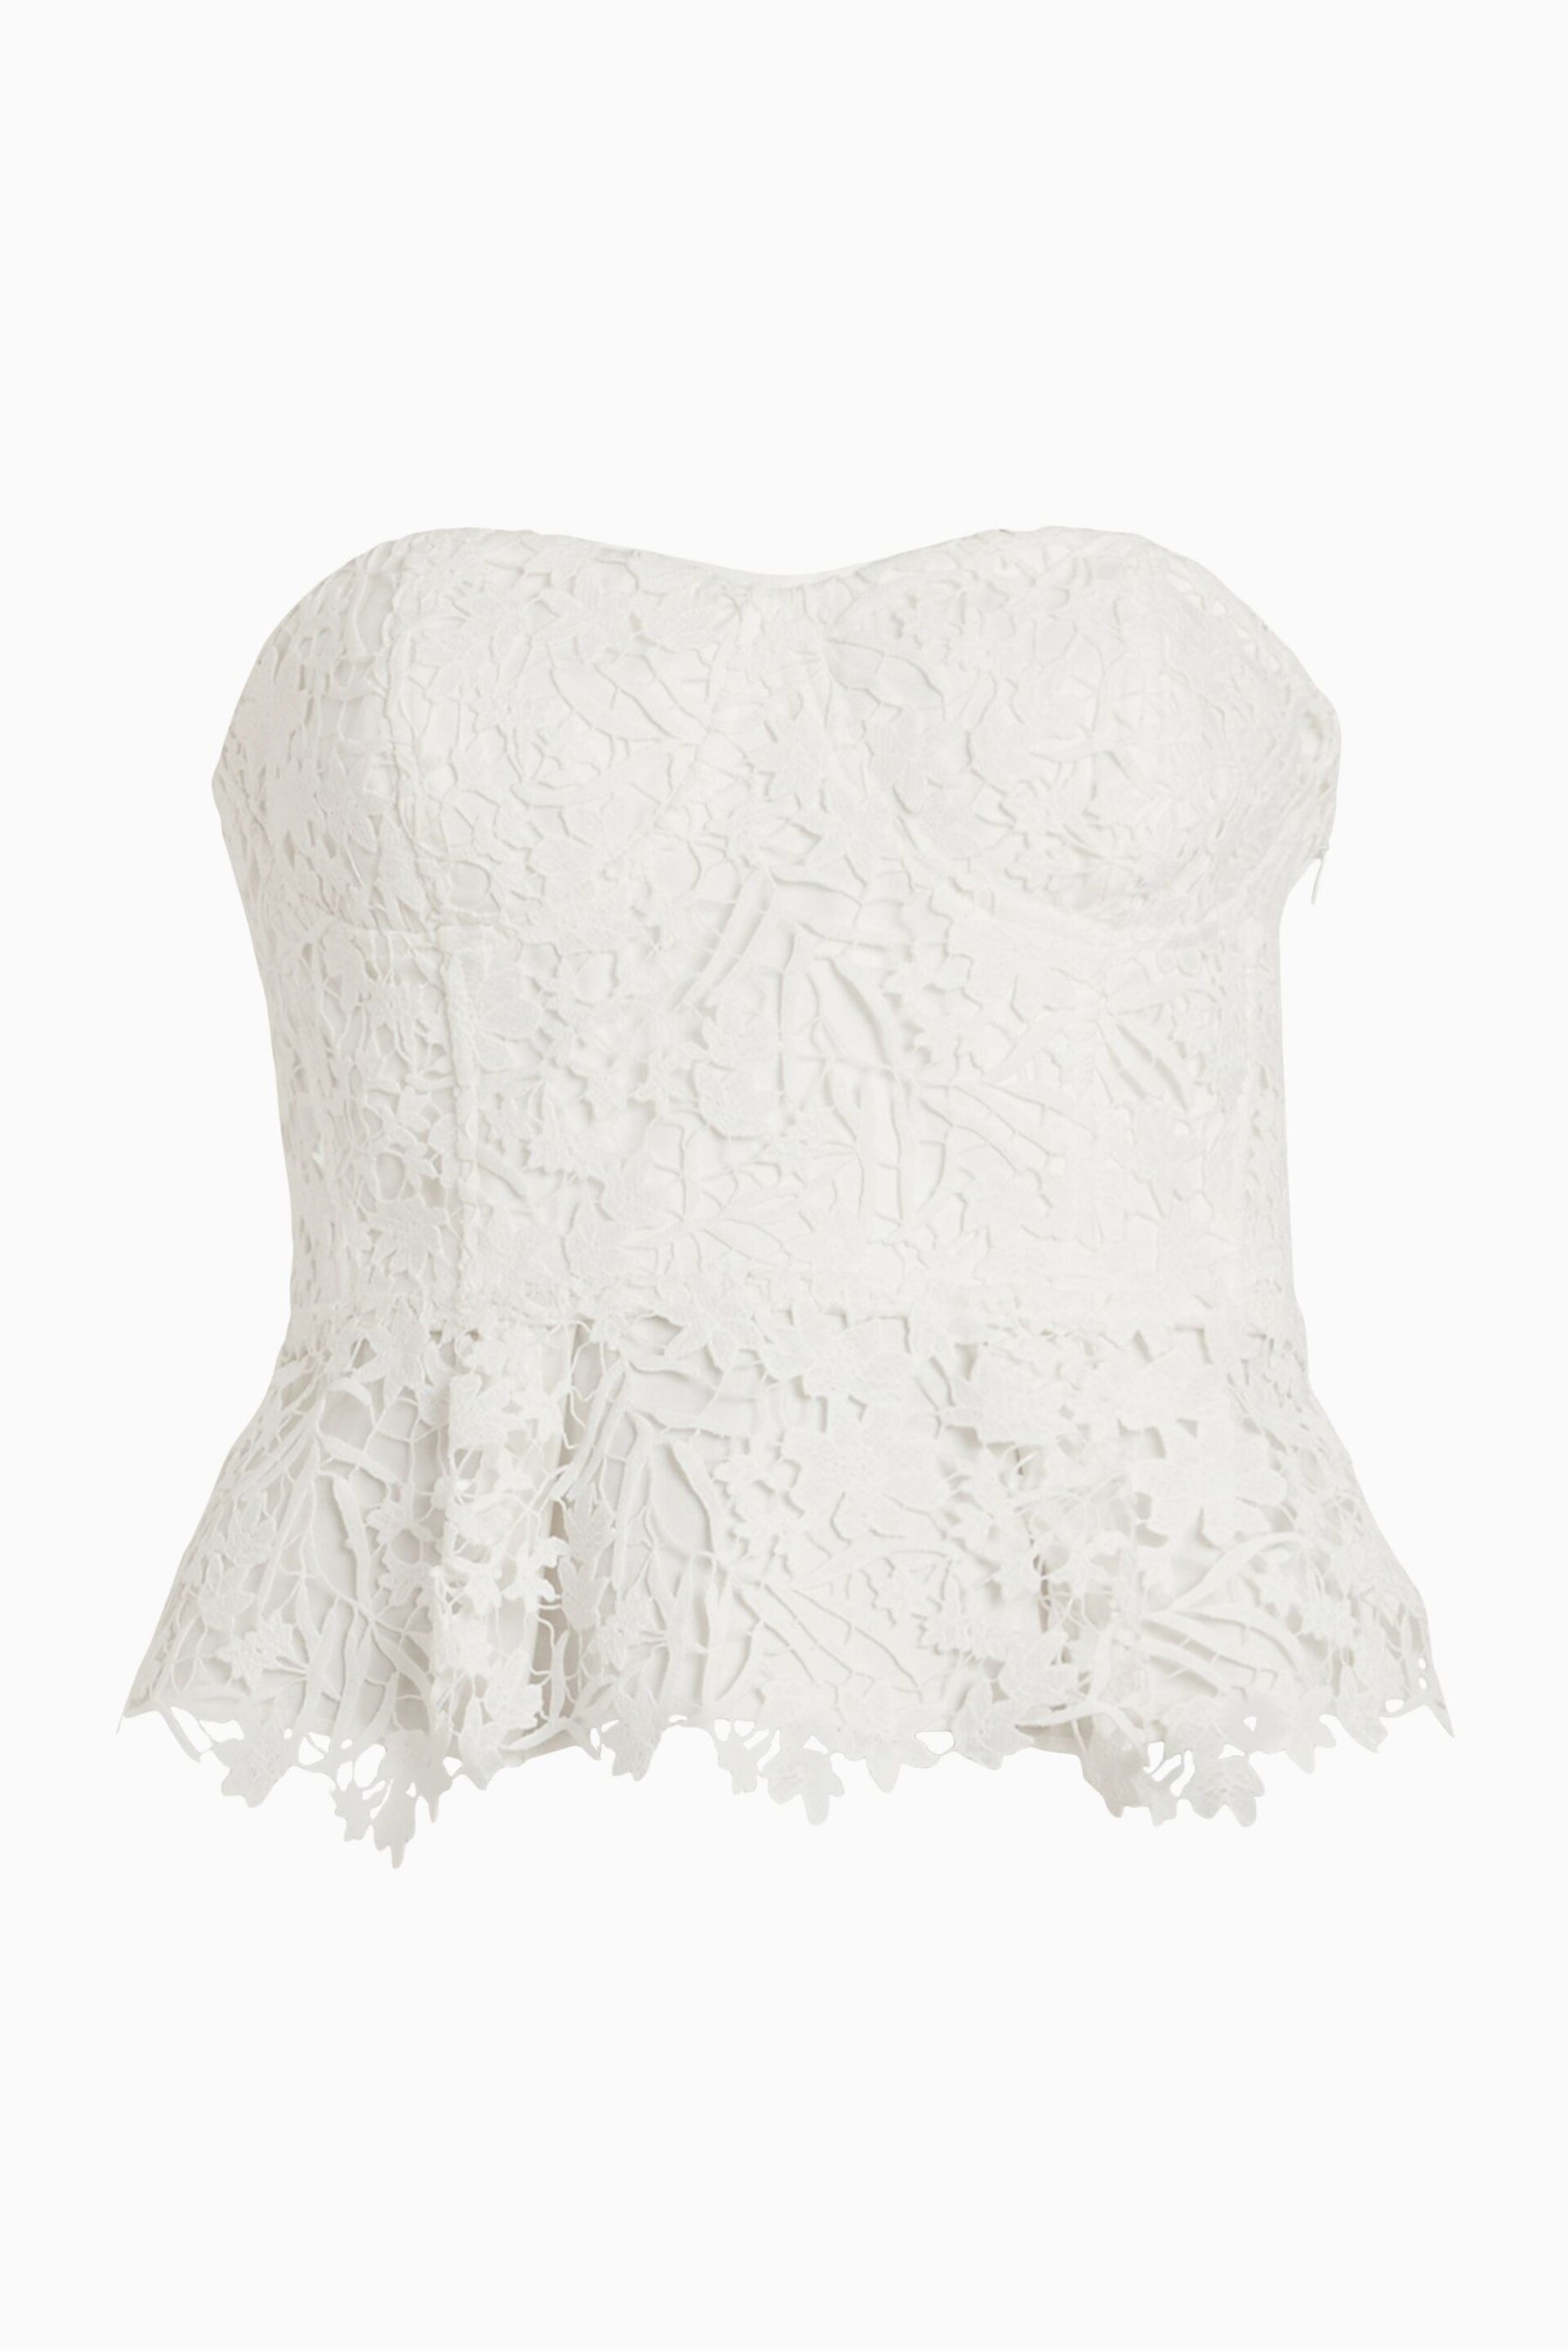 AllSaints White Broderie Sienna Top - Image 6 of 6